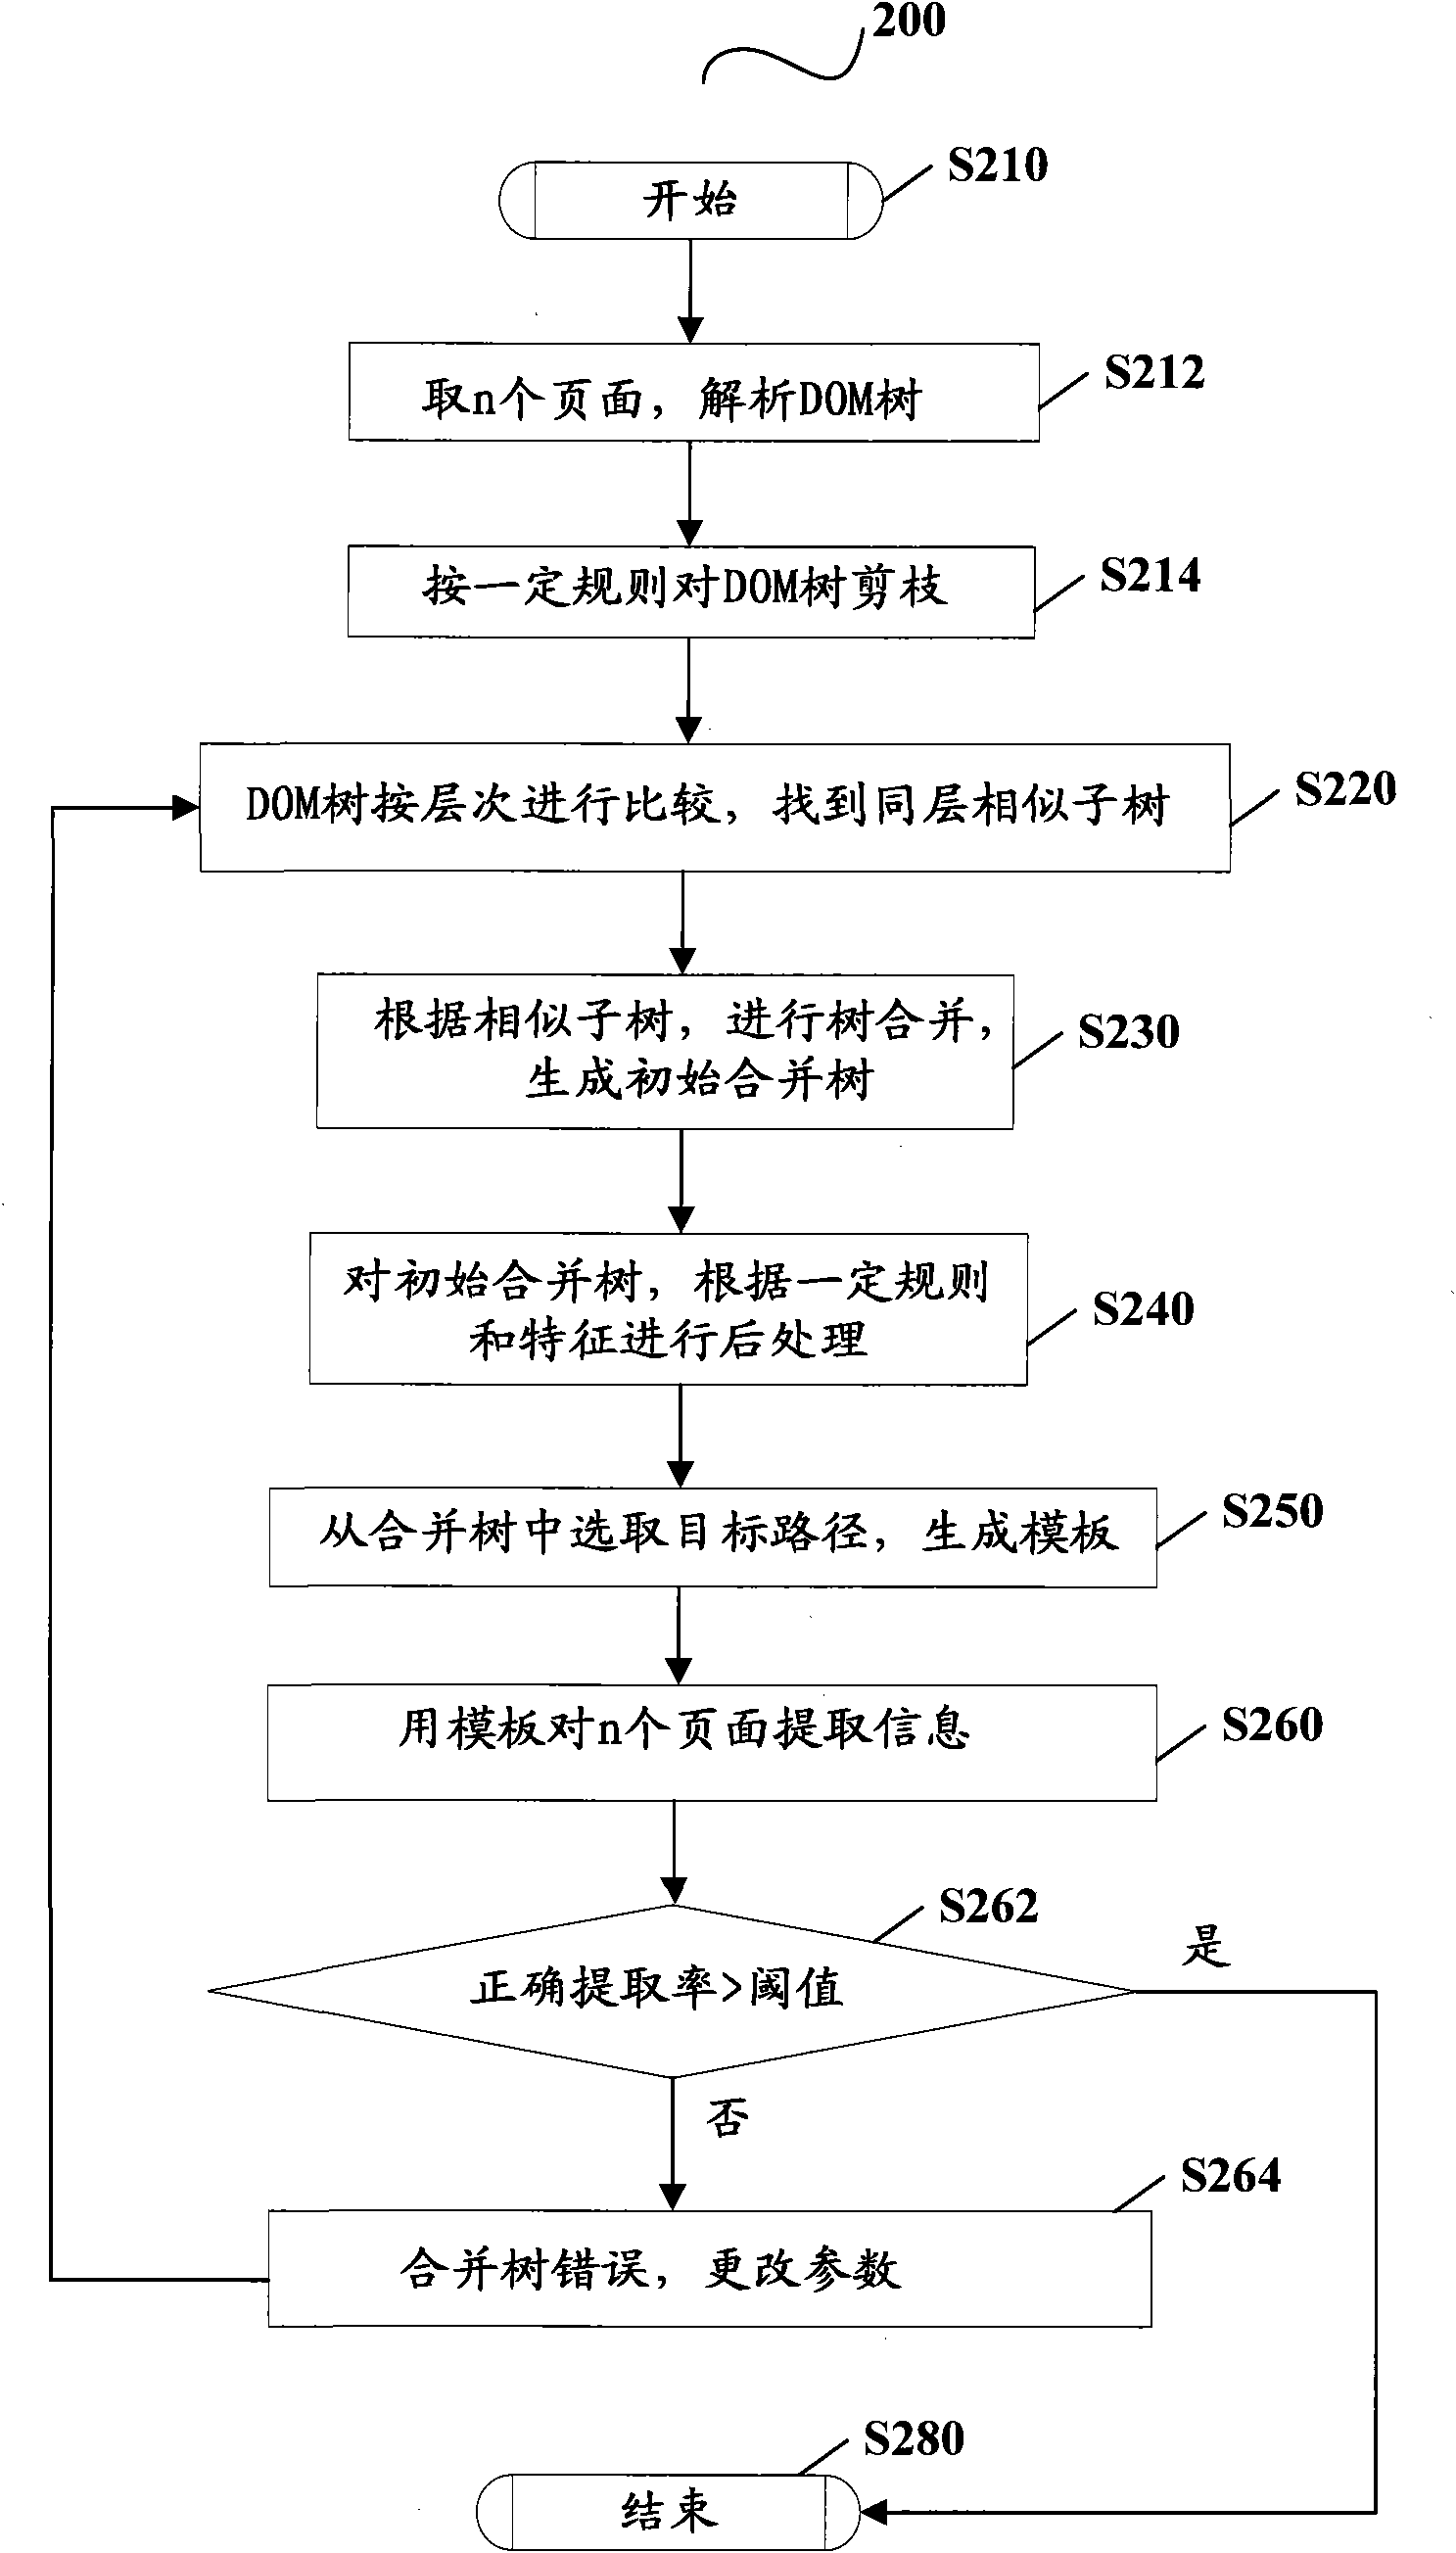 Method and device for forming merge tree for generating document template